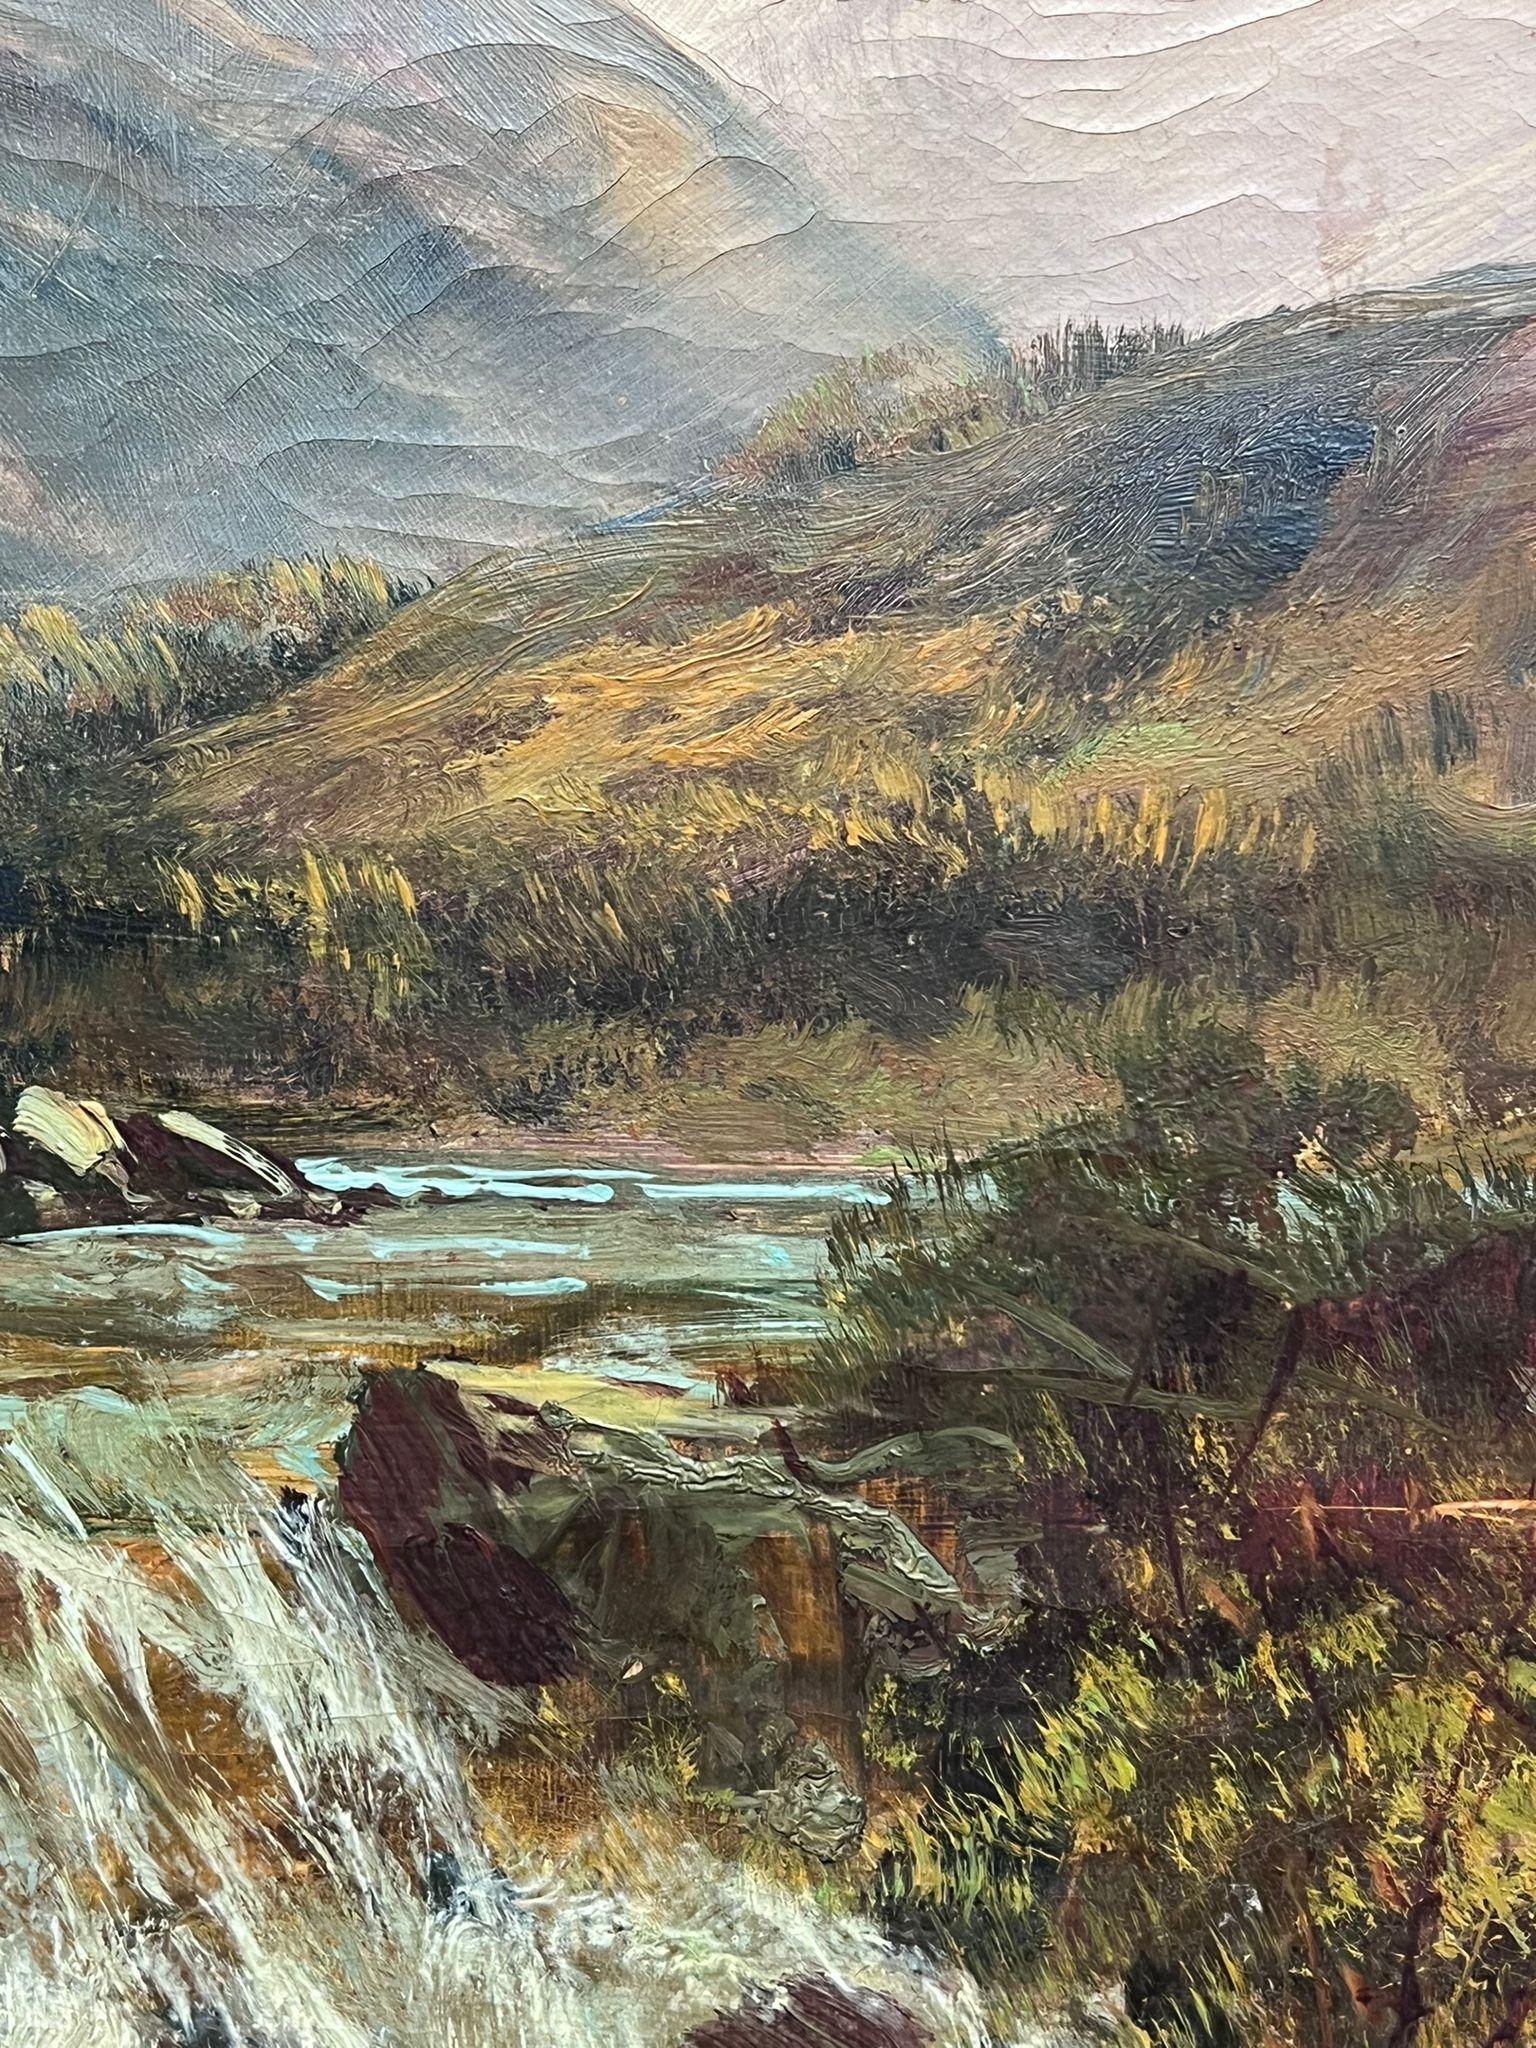 Antique Scottish Highland Landscape Oil Painting Full Spate River in Mountains For Sale 6